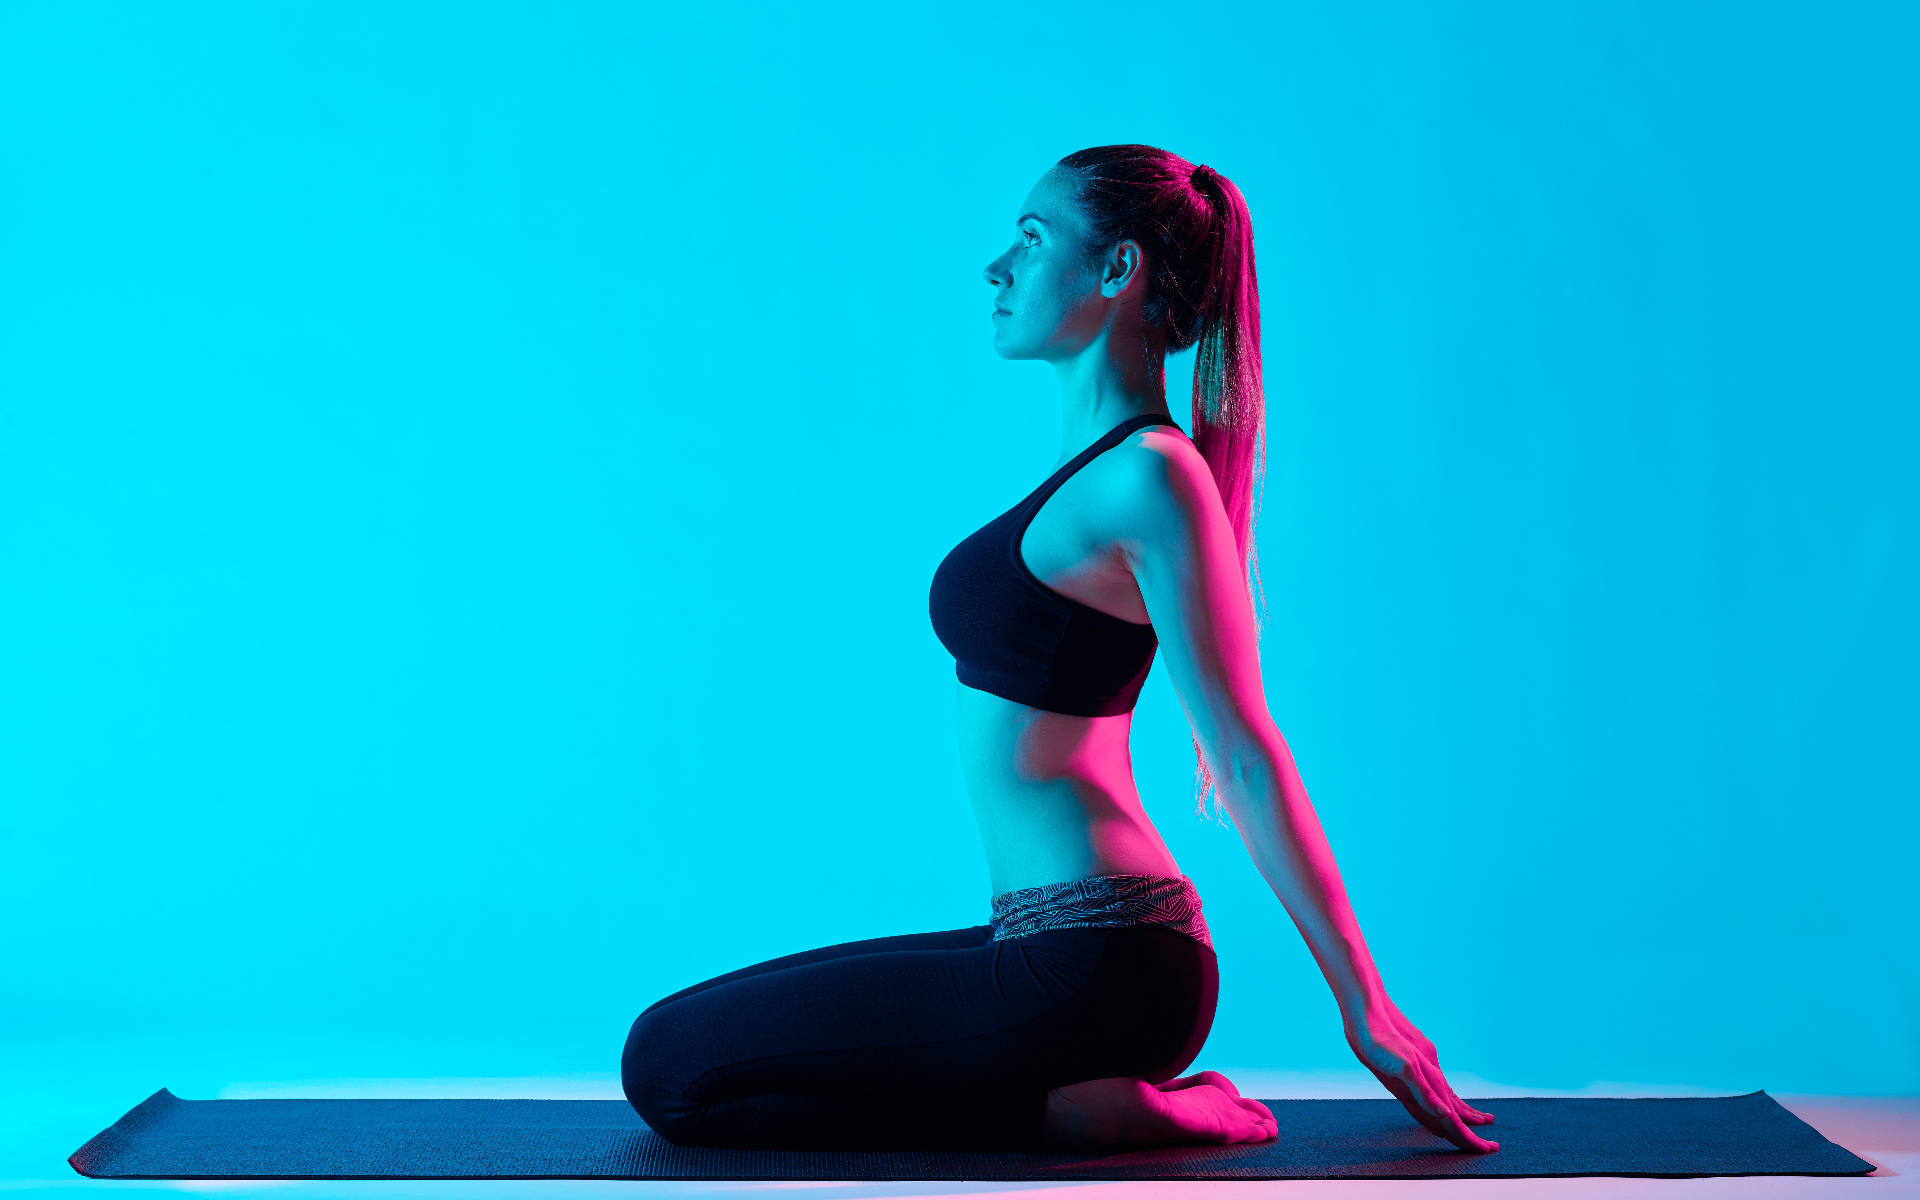 Yoga Woman With Blue Light Wallpaper